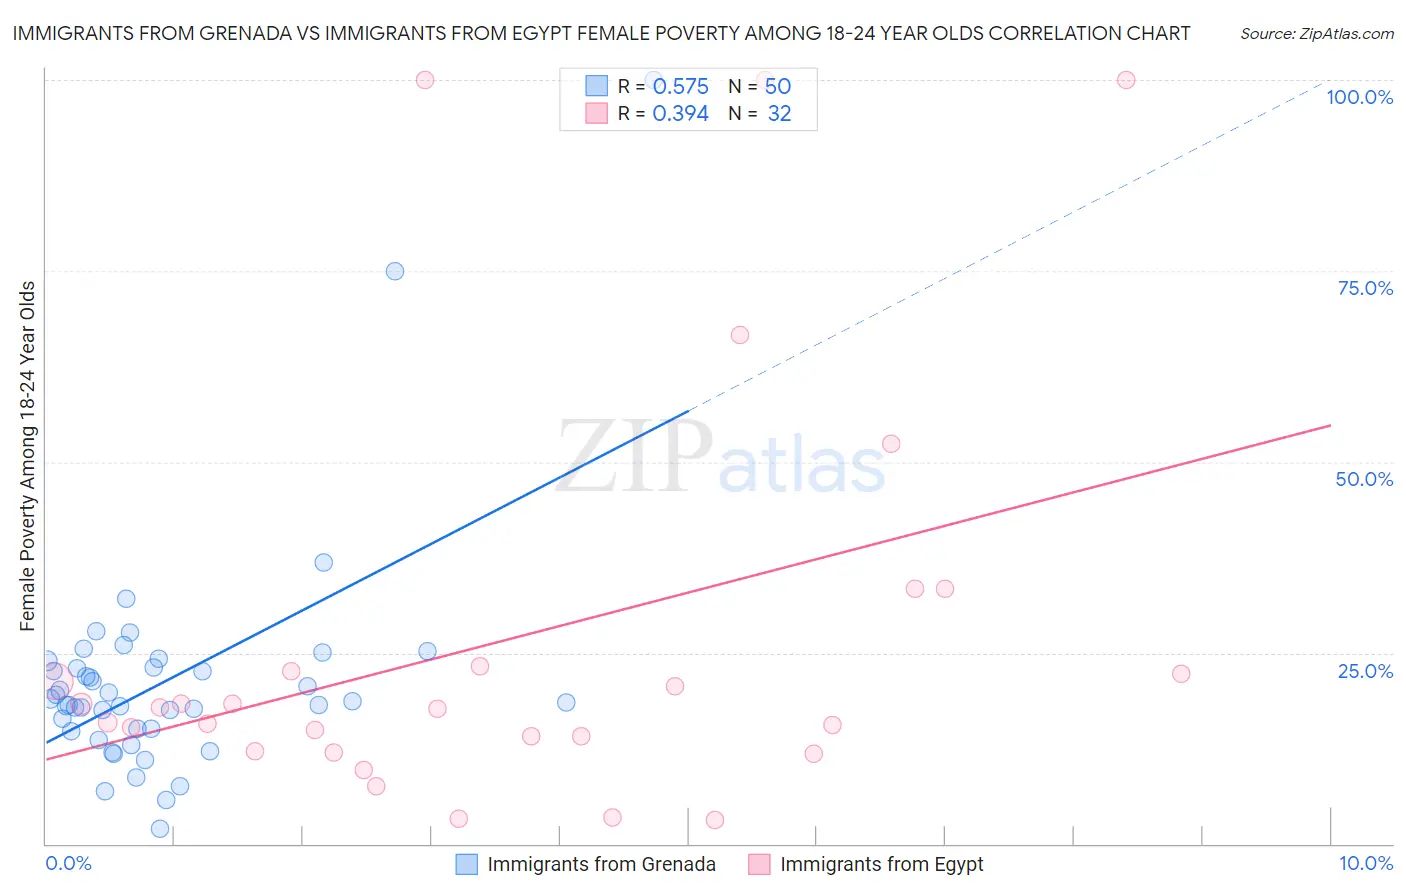 Immigrants from Grenada vs Immigrants from Egypt Female Poverty Among 18-24 Year Olds